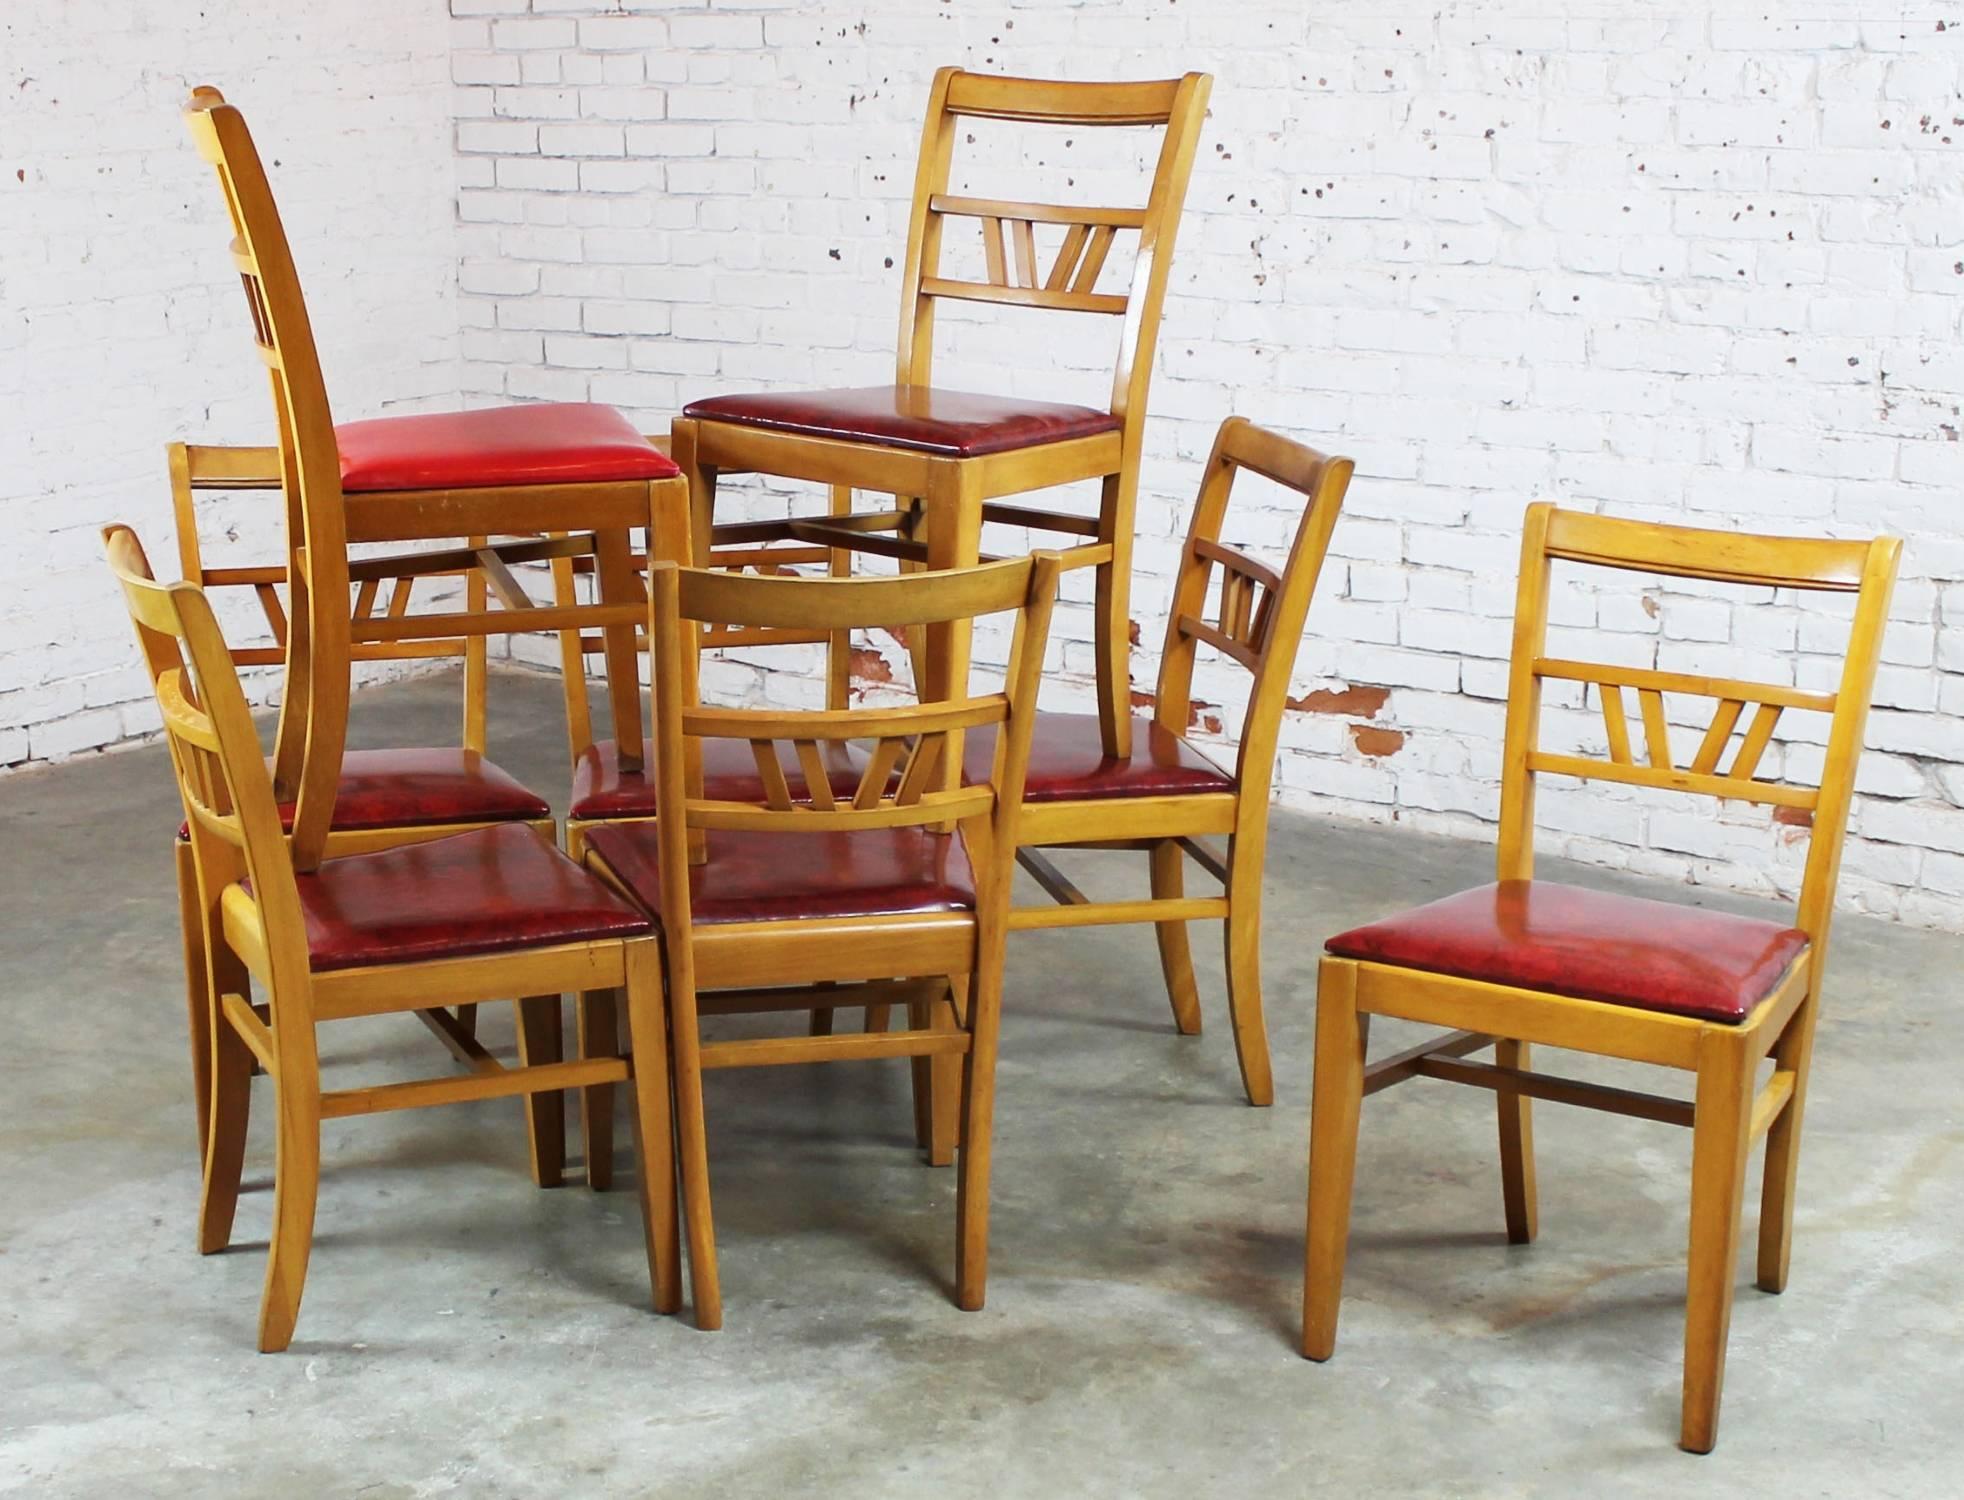 Fun set of eight Mid-Century dining chairs in mahogany. These chairs have great lines and lots and lots of potential. In good vintage condition.

Awesome set of eight light colored mahogany dining chairs from Mid-Century era. They are petite and